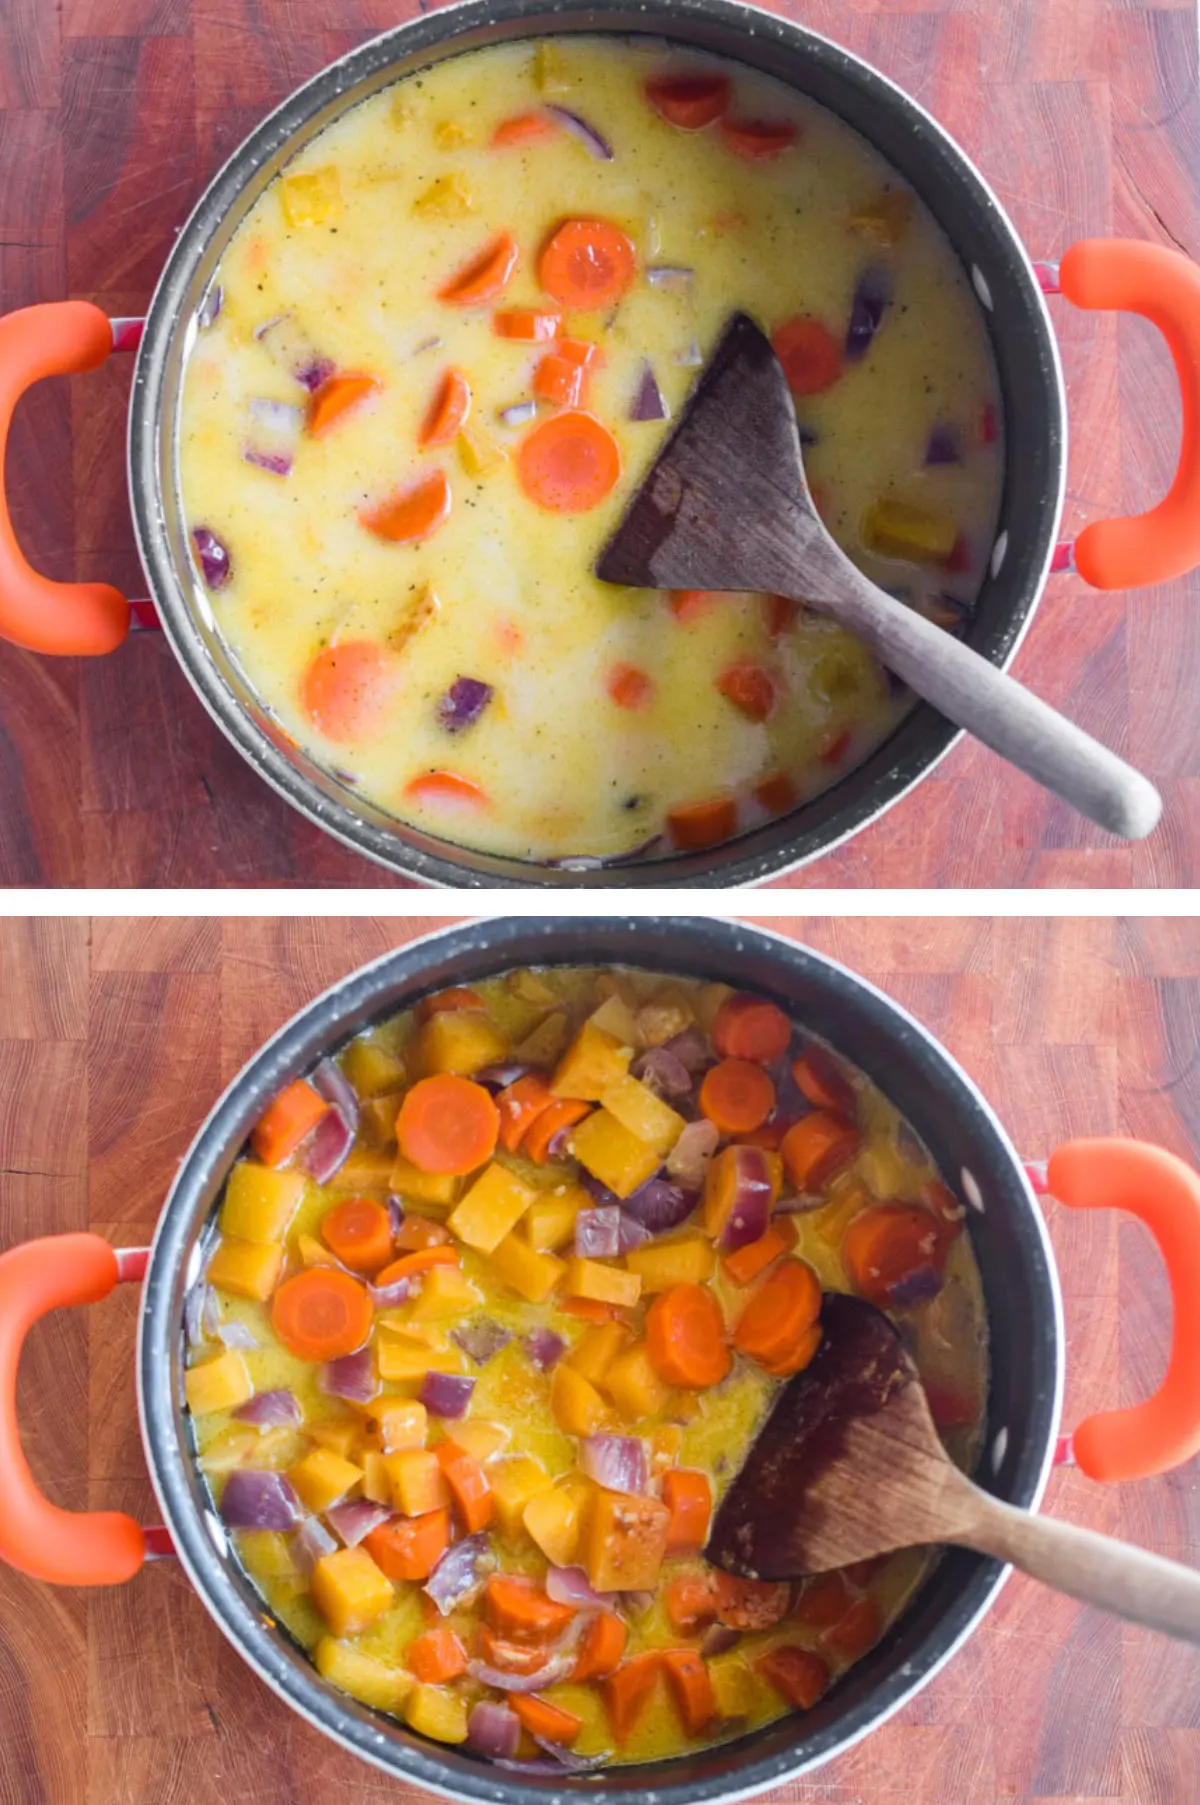 Two overhead images in one: 1. Roasted rutabaga, vegetable broth, heavy cream, salt and pepper are added to the pot. 2. Ingredients have been simmered for 20 minutes and stirred. 